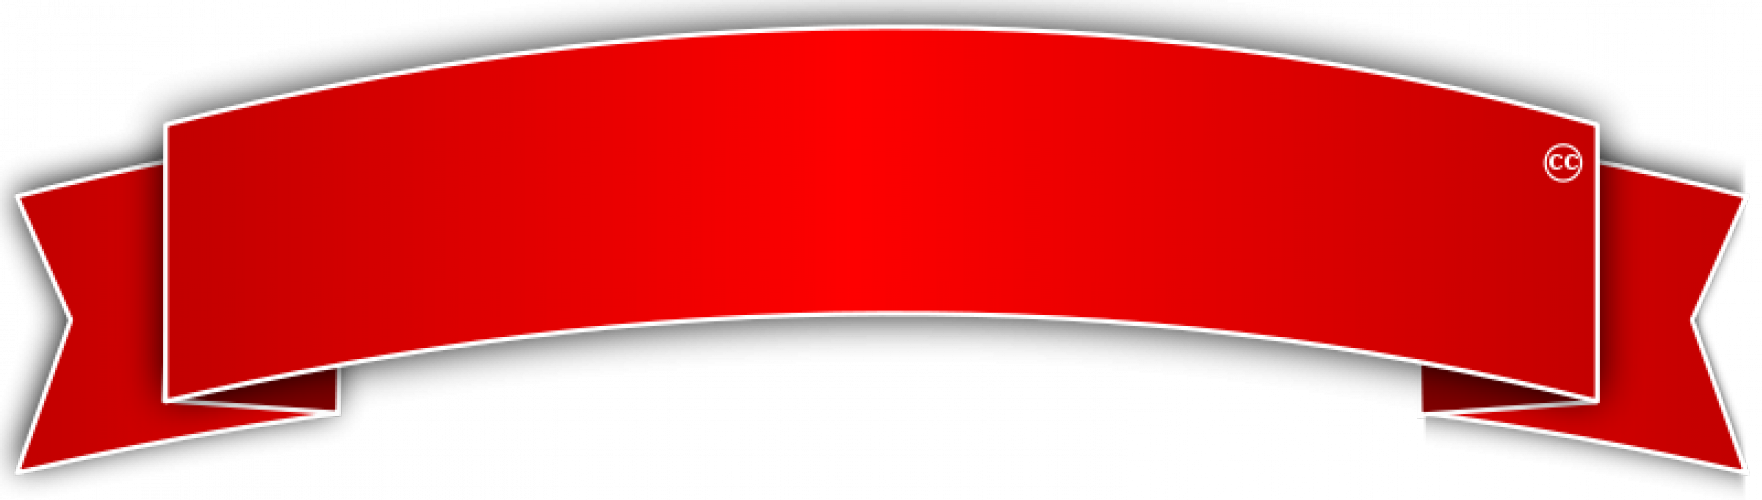 Blank red banner.